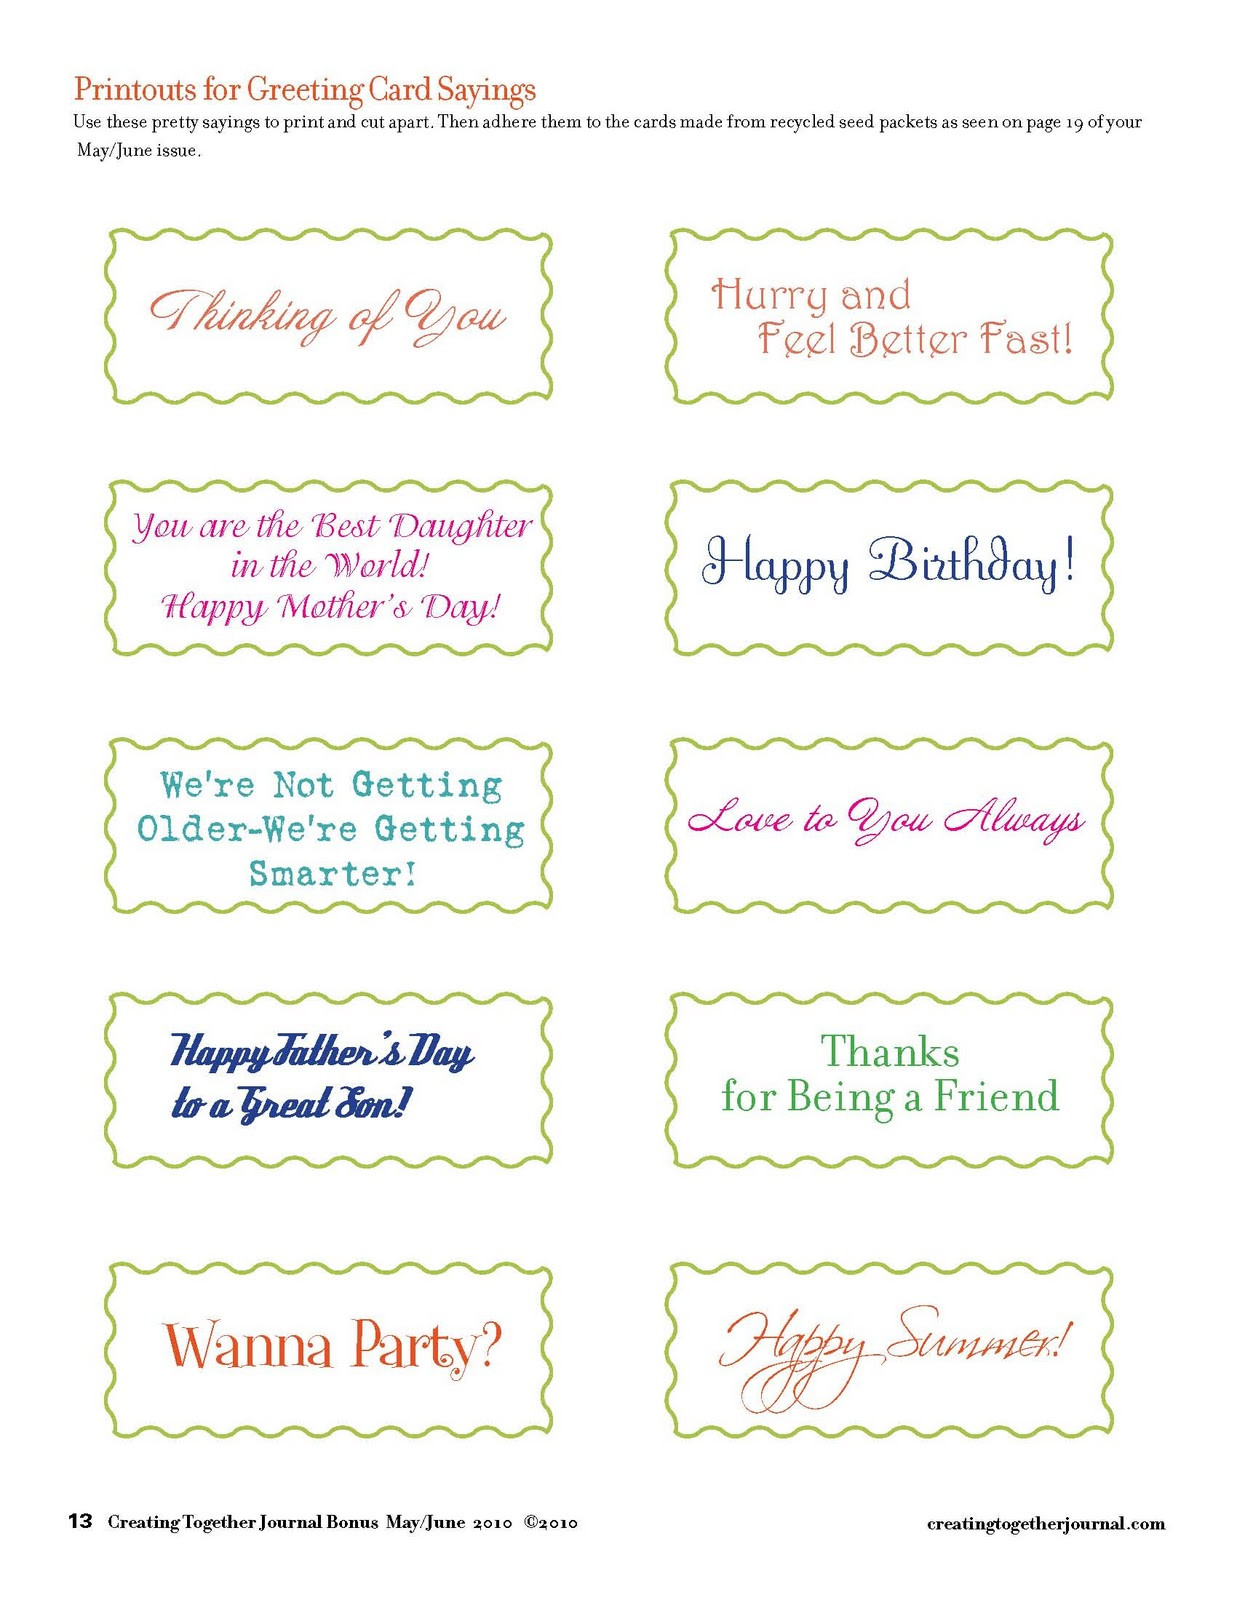 Birthday Card Sayings
 Creating To her Journal Printouts for Greeting Card Sayings